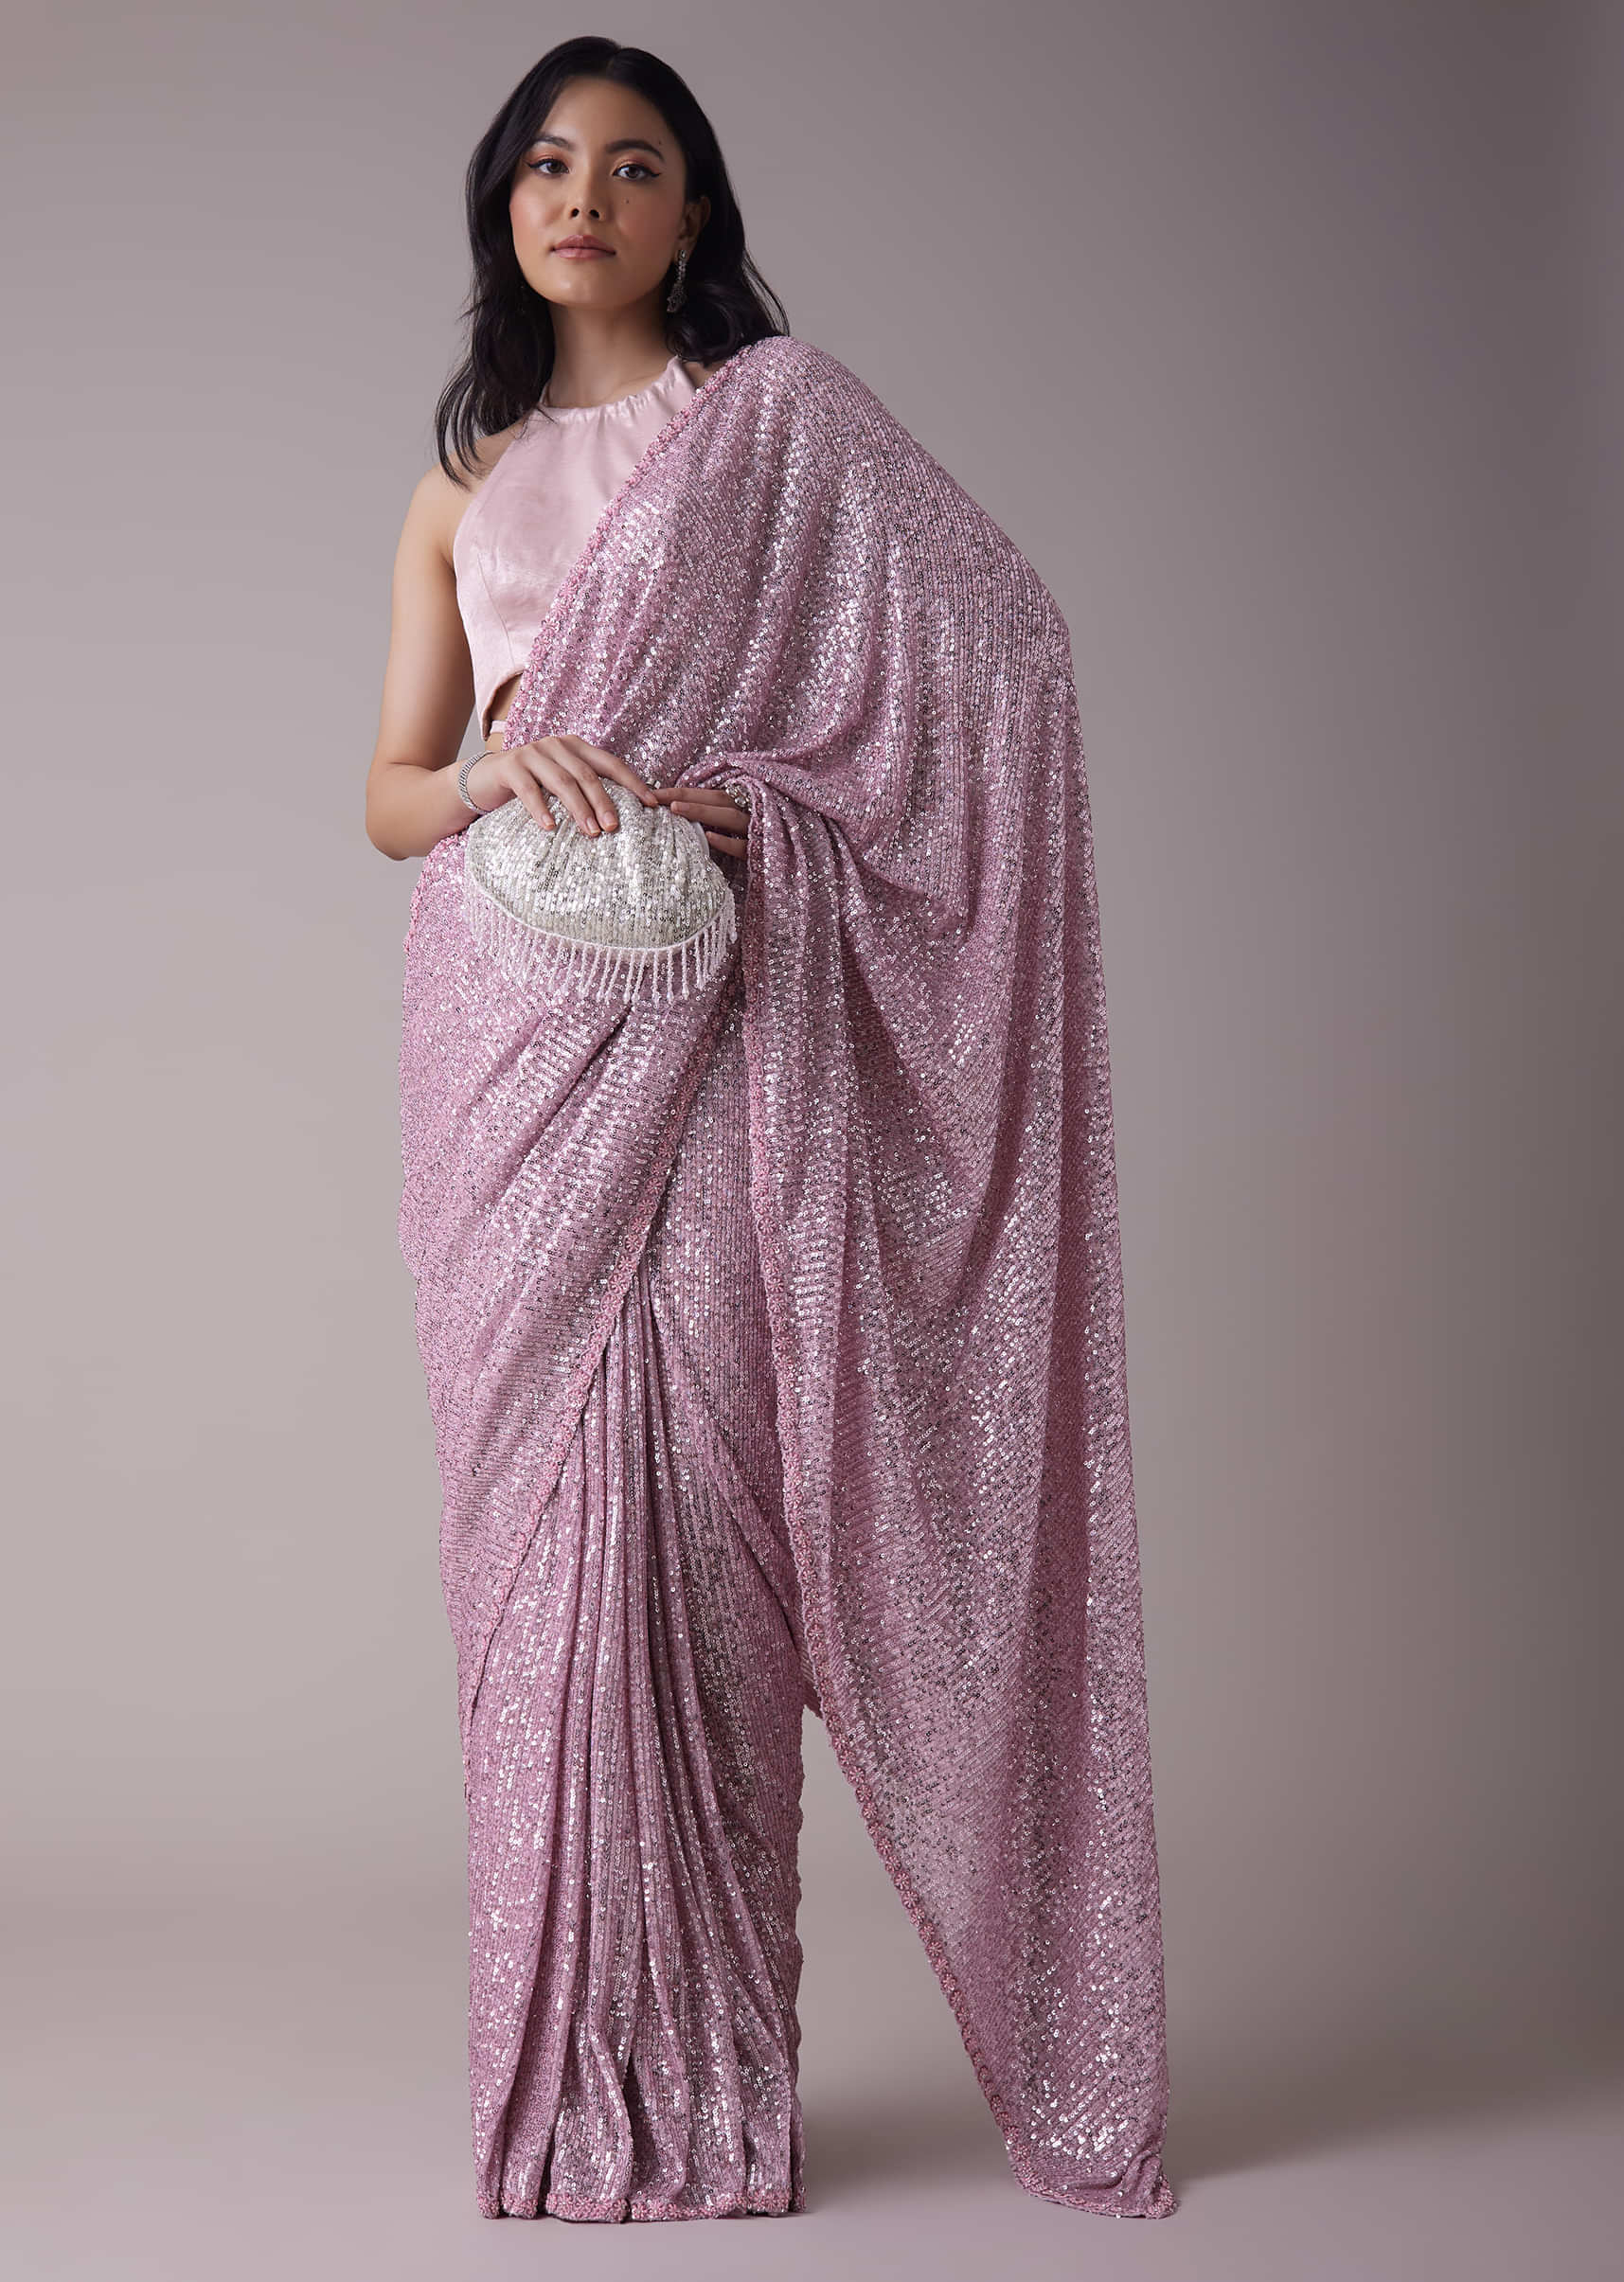 Lilac Purple Sequins Saree With An Embellished Border